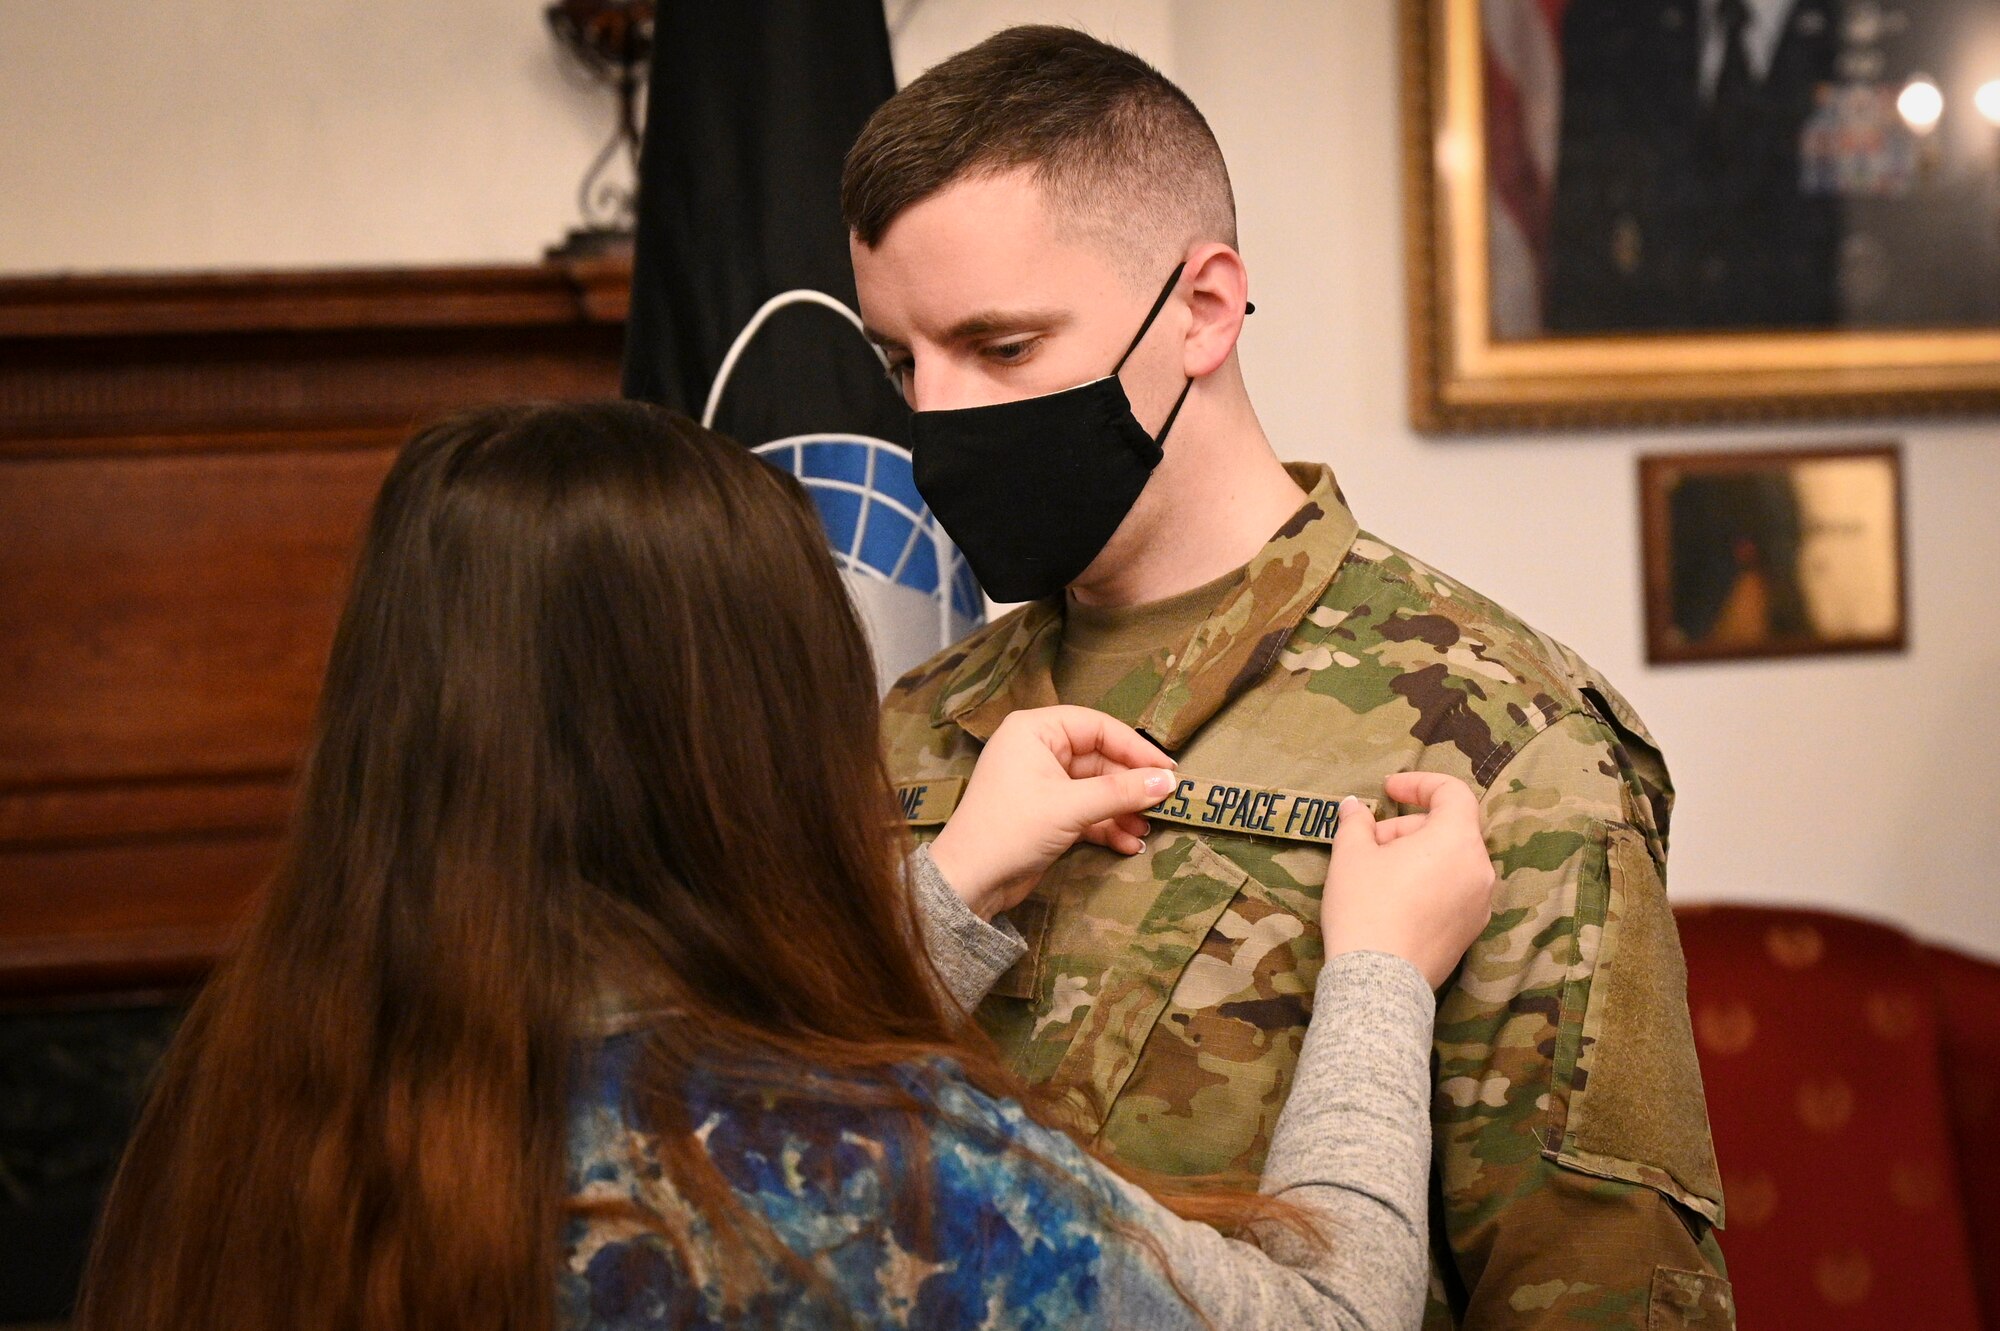 U.S. Army Sgt. Harly D. Gomme, White House Communications Agency satellite communications systems operator, has U.S. Space Force patches placed on his uniform by his wife, Tiffany, during his inter-service transfer ceremony.